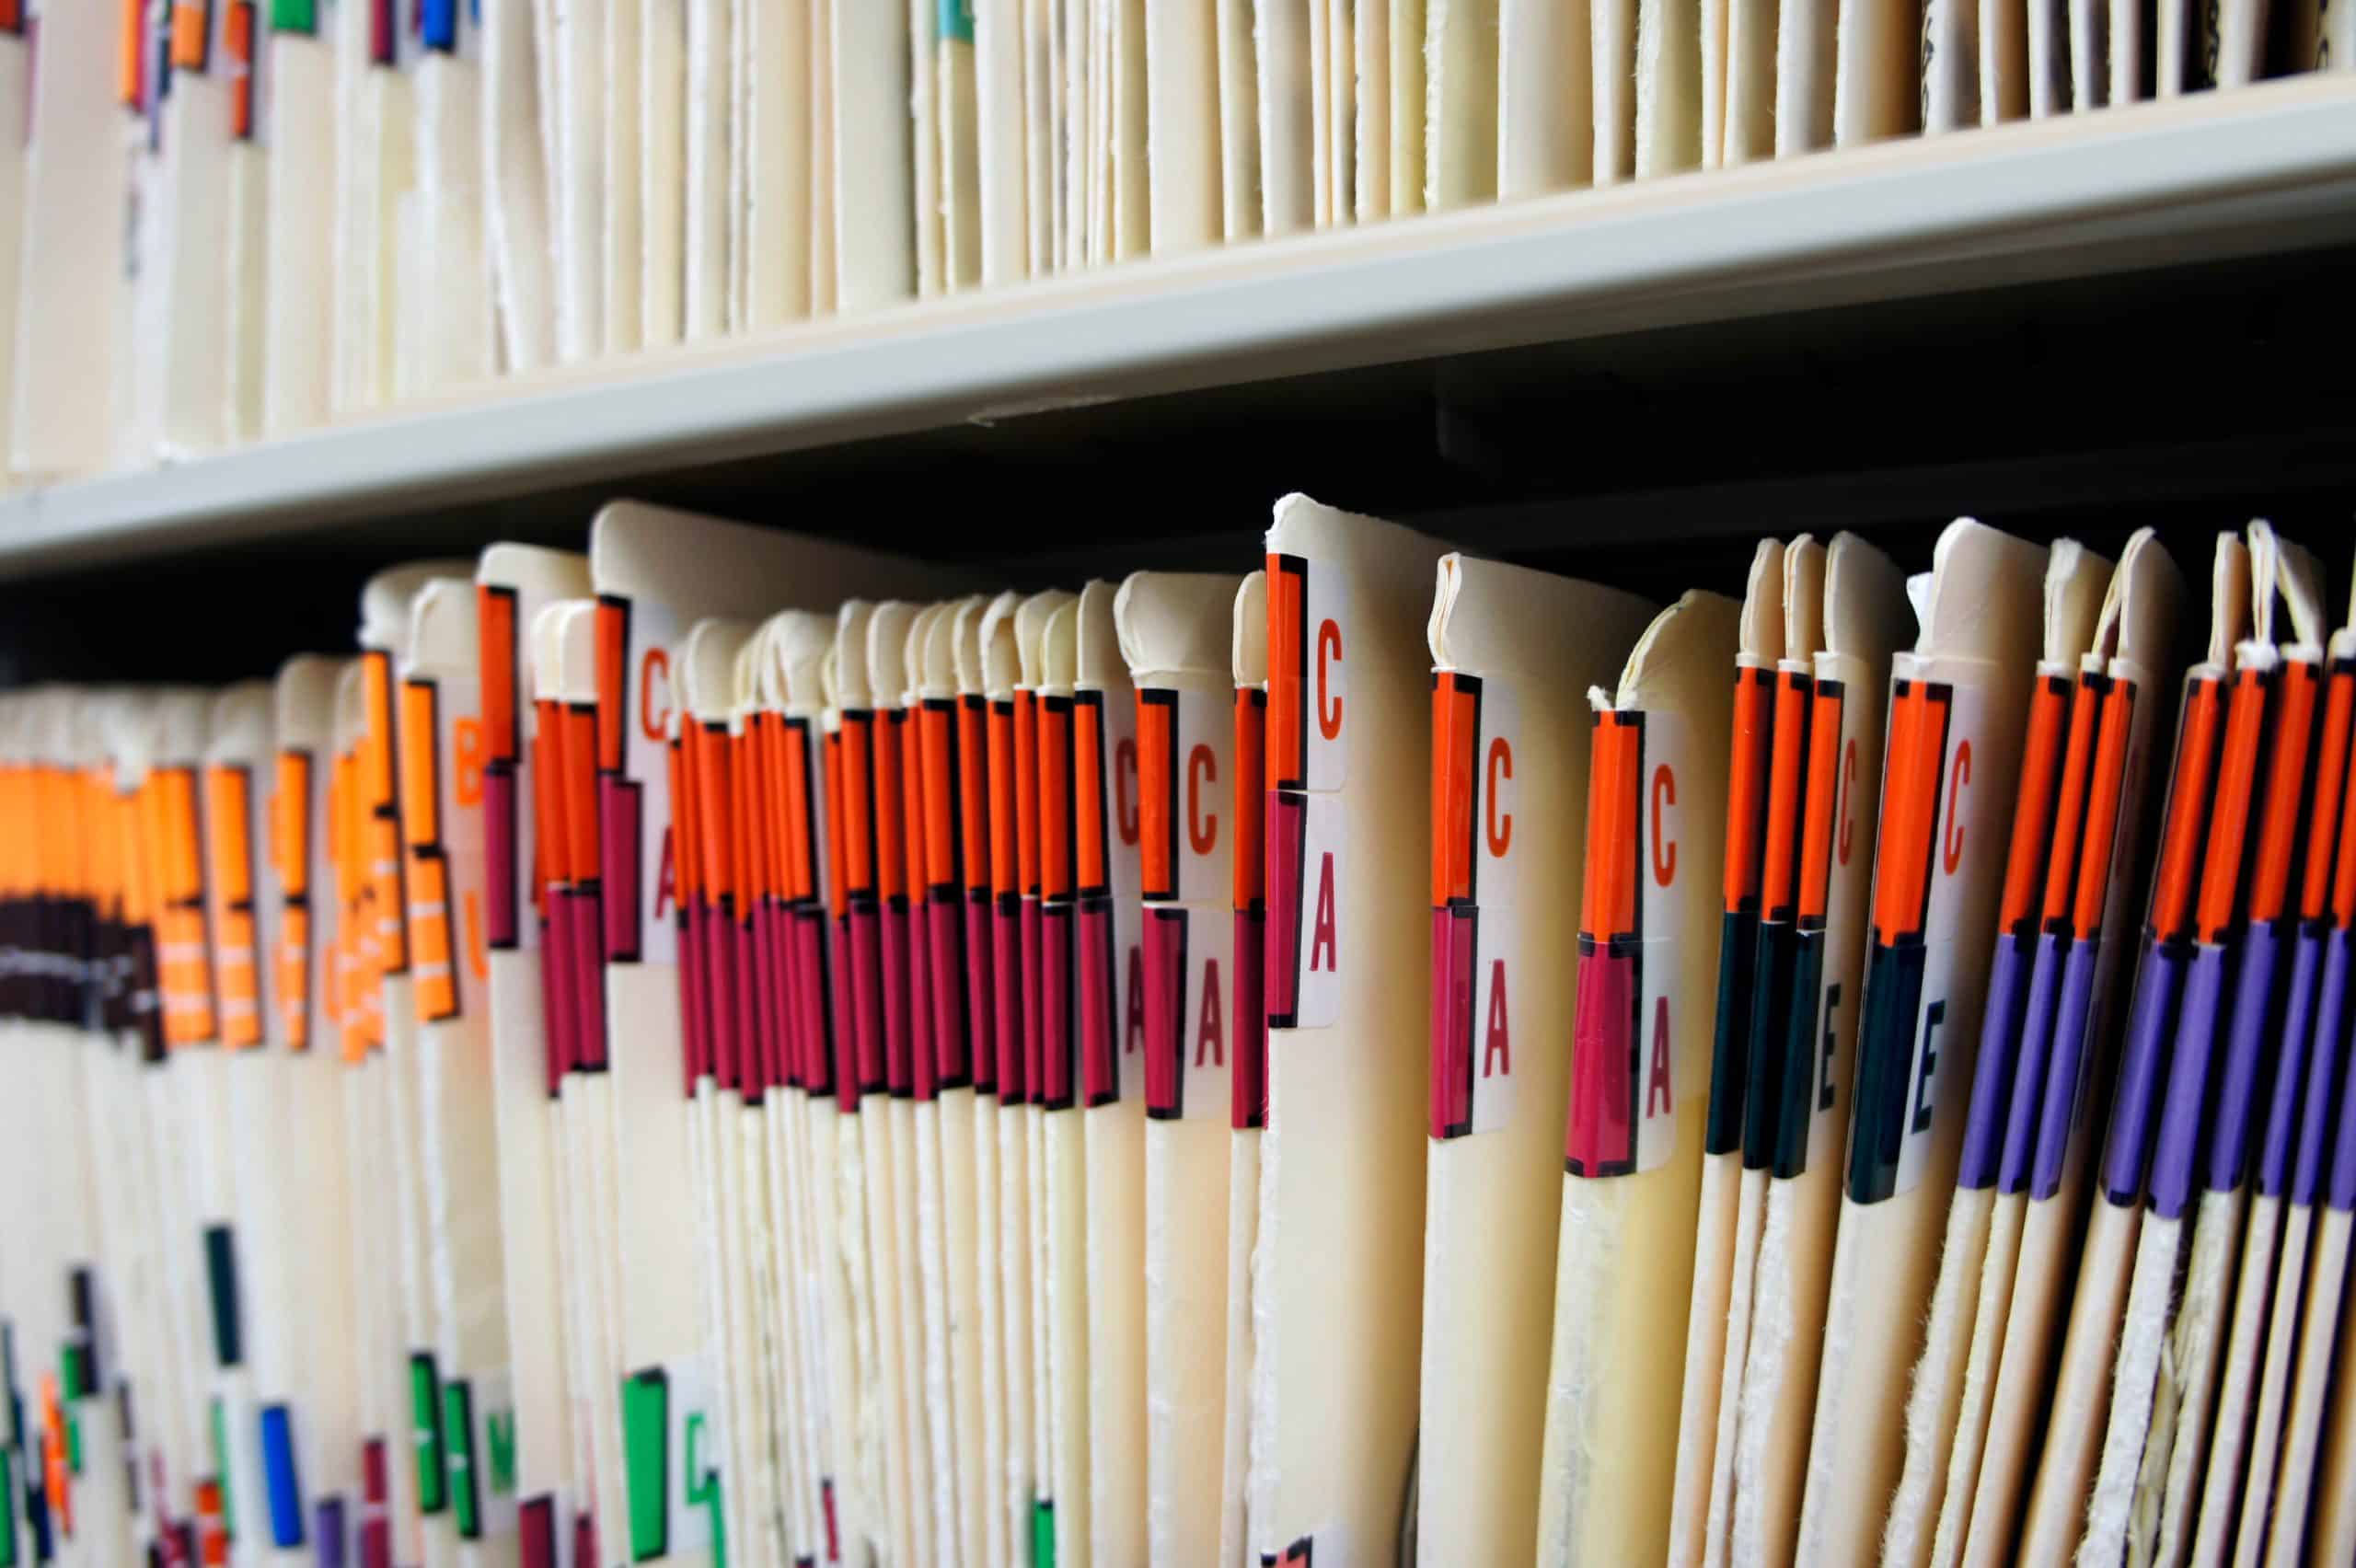 Paper medical records filed neatly.